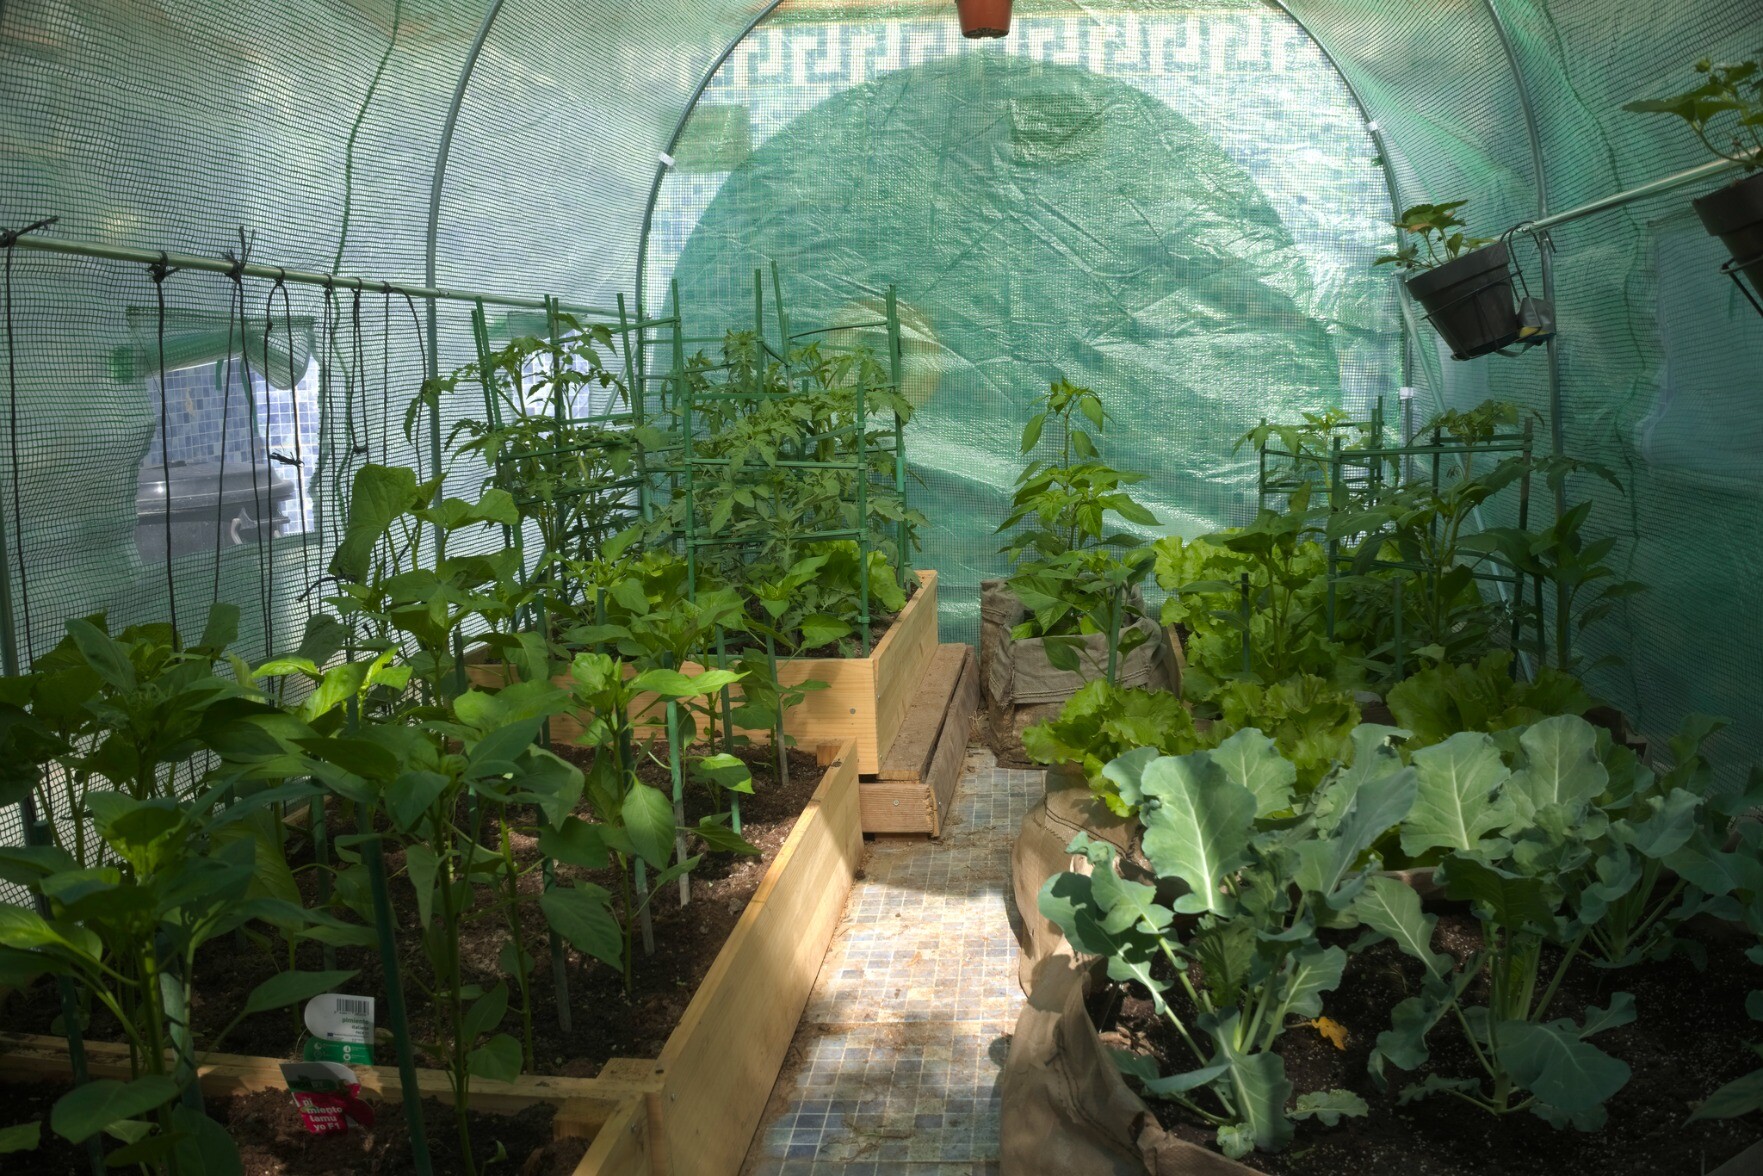 A small polytunnel is filled with green vegetables. Some light comes through in the centre section